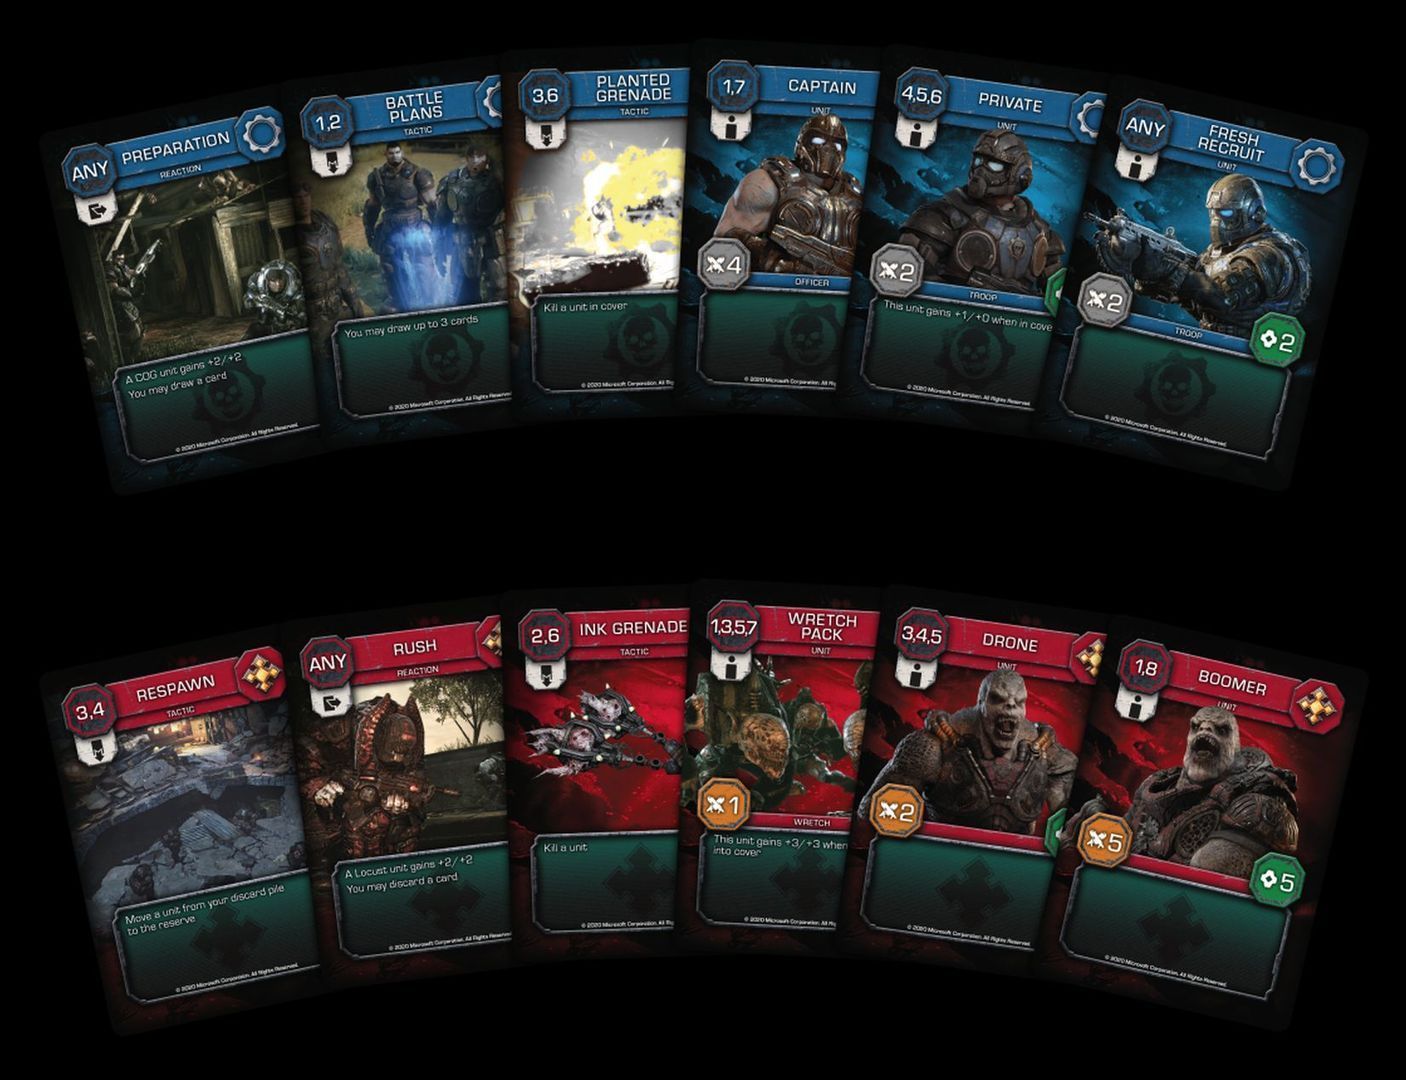 Gears of War - The Card Game (English)